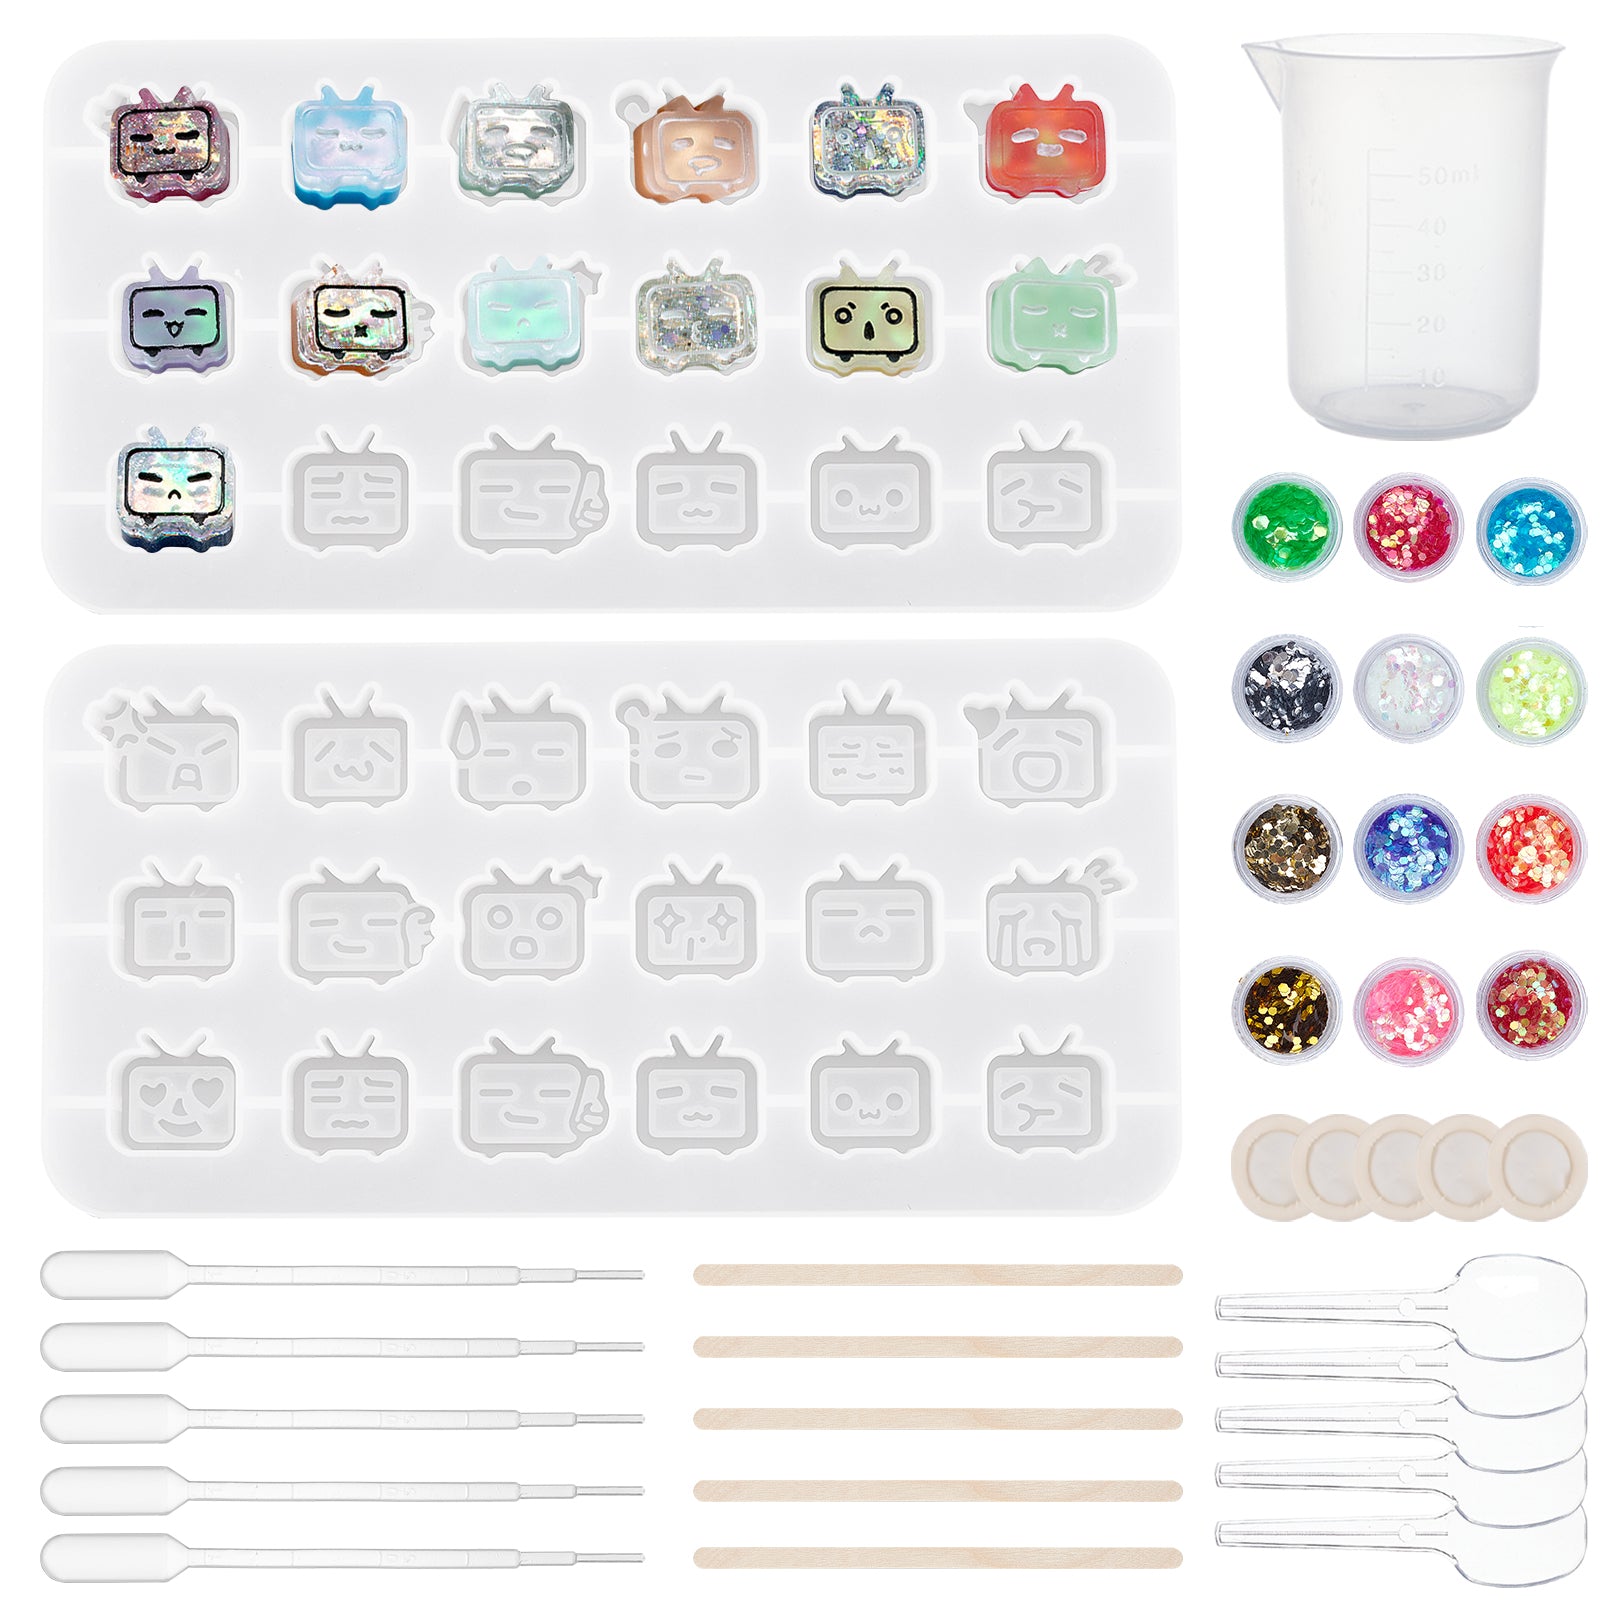 CRASPIRE DIY Food Grade Silicone Molds, For UV Resin & Epoxy Resin Jewelry  Making, with Birch Wooden Craft Ice Cream Sticks, Plastic Transfer Pipettes  & Spoons & Measuring Cup, Latex Finger Cots